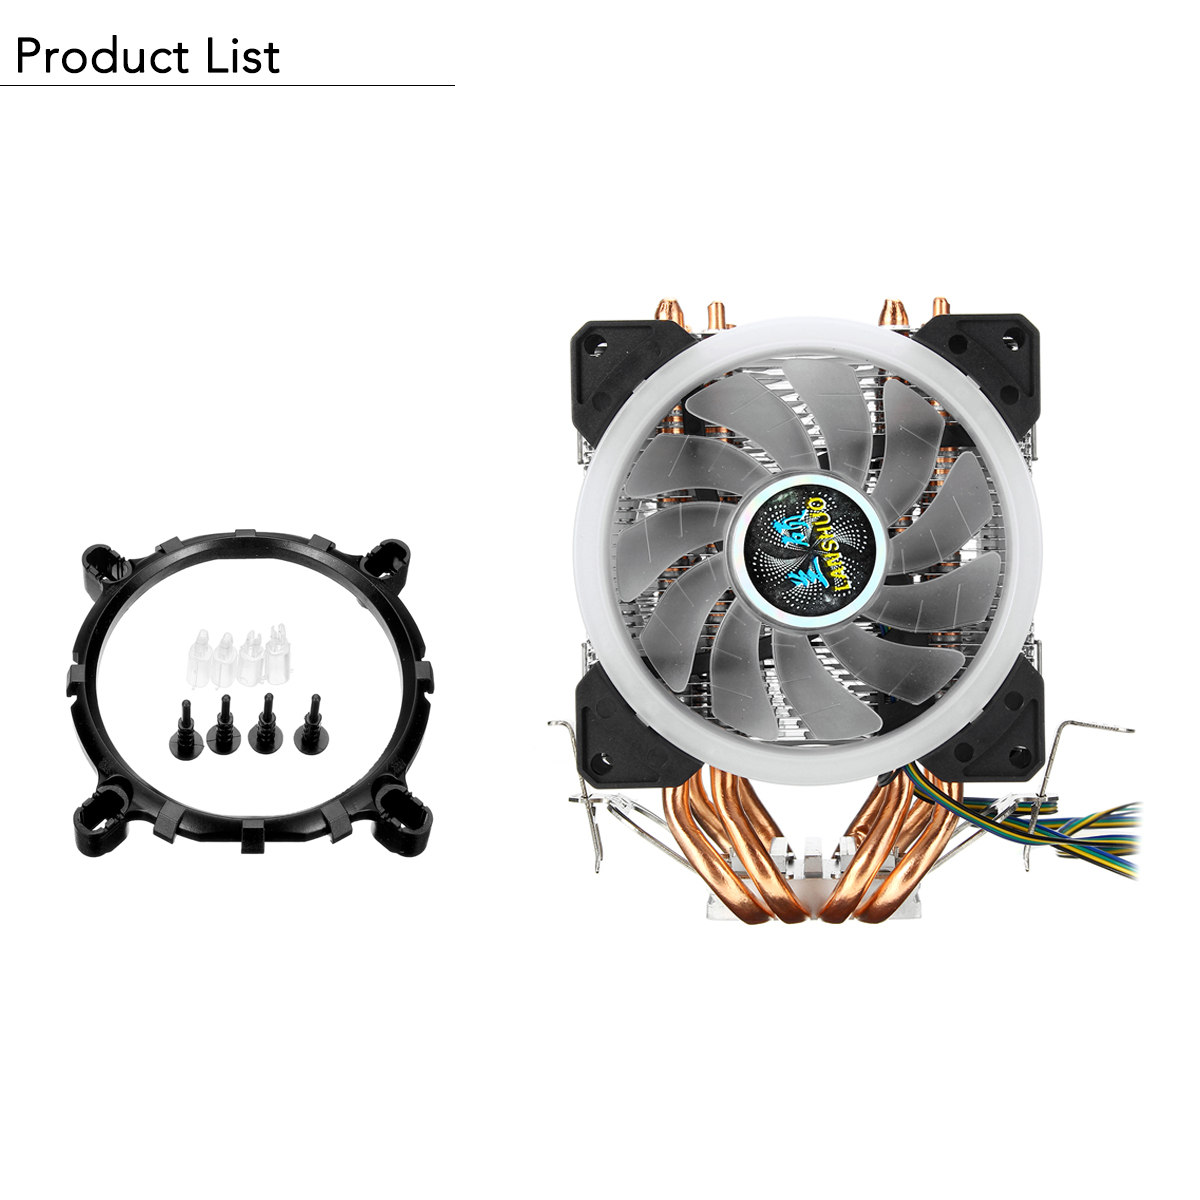 4Pin Three Fans 4-Heatpipes Colorful Backlit CPU Cooling Fan Cooler Heatsink For Intel AMD 14